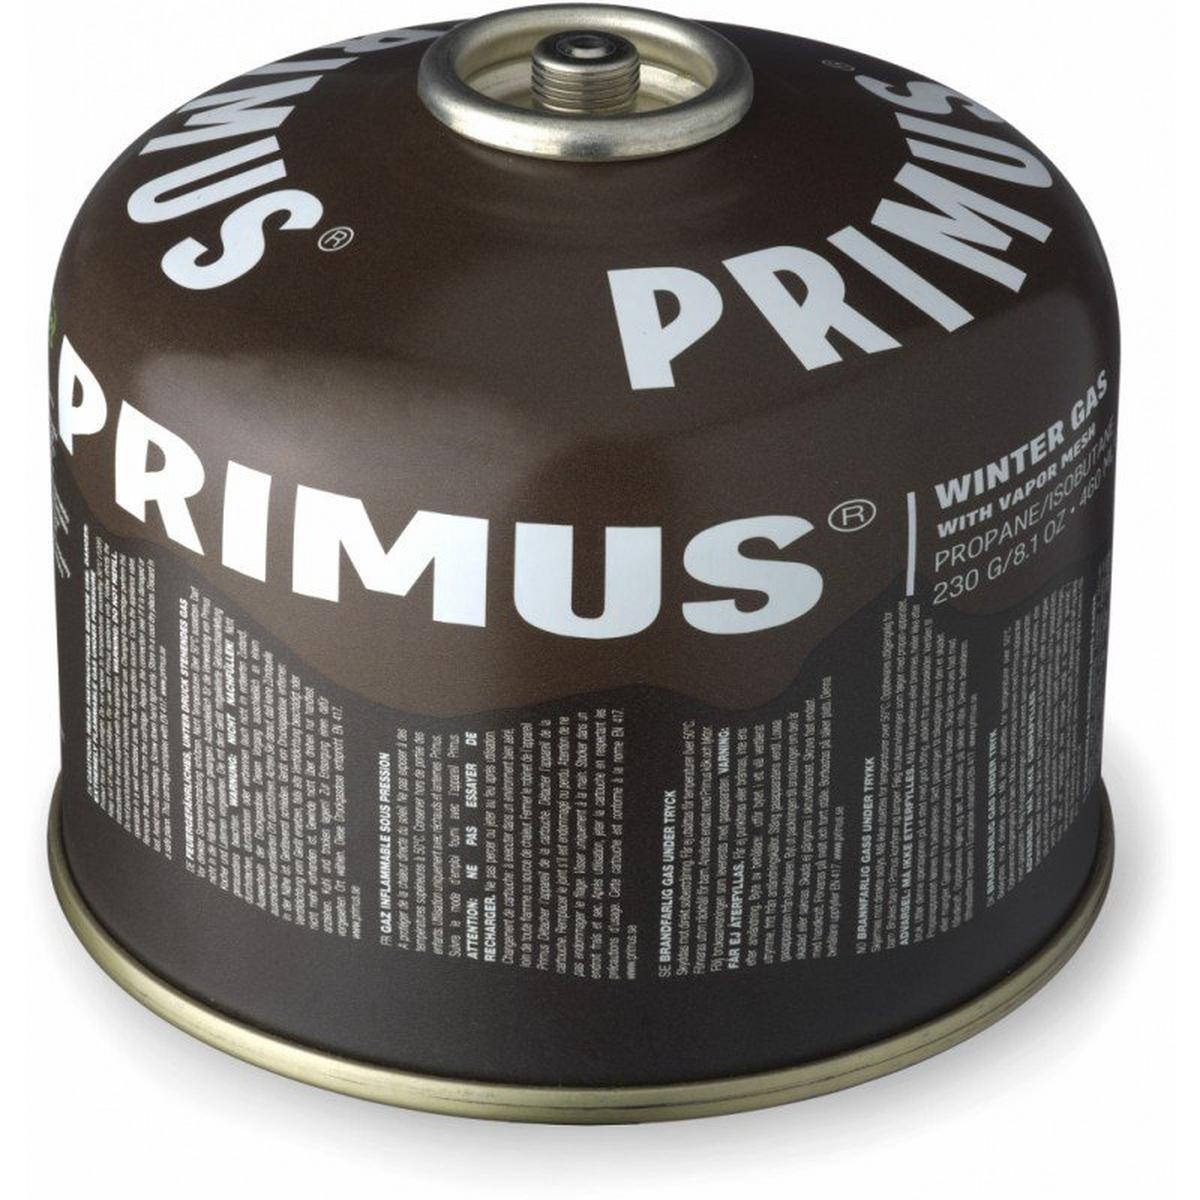 Primus Winter Gas - 230g Canister